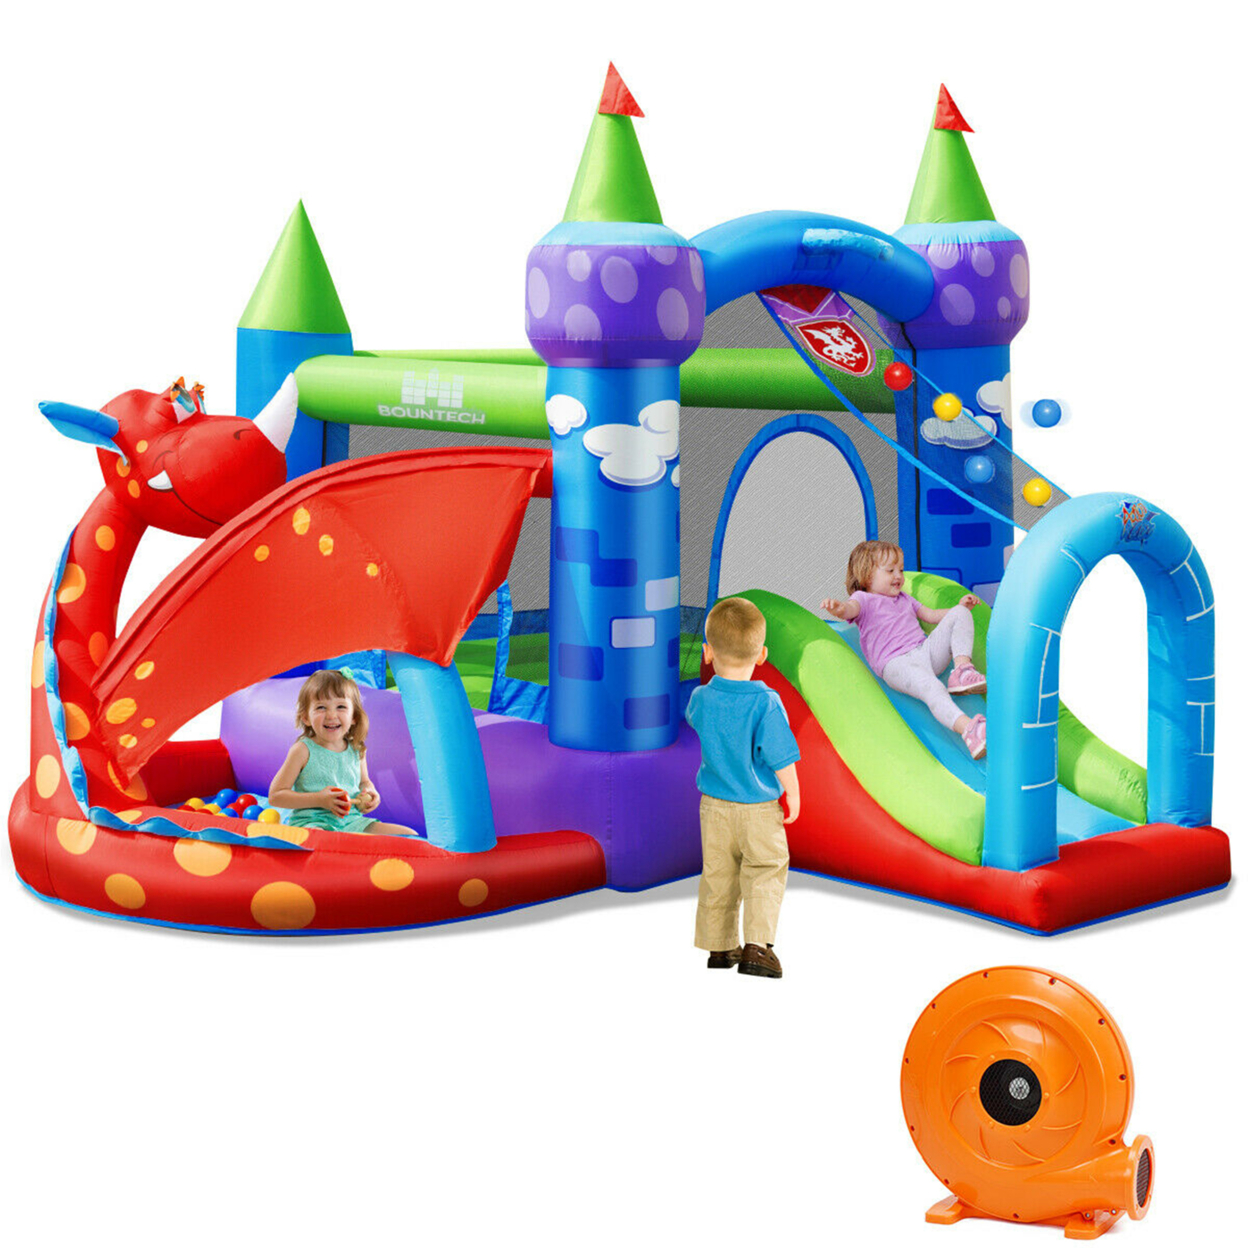 Kids Inflatable Bounce House Dragon Jumping Slide Bouncer Castle W/ 750W Blower